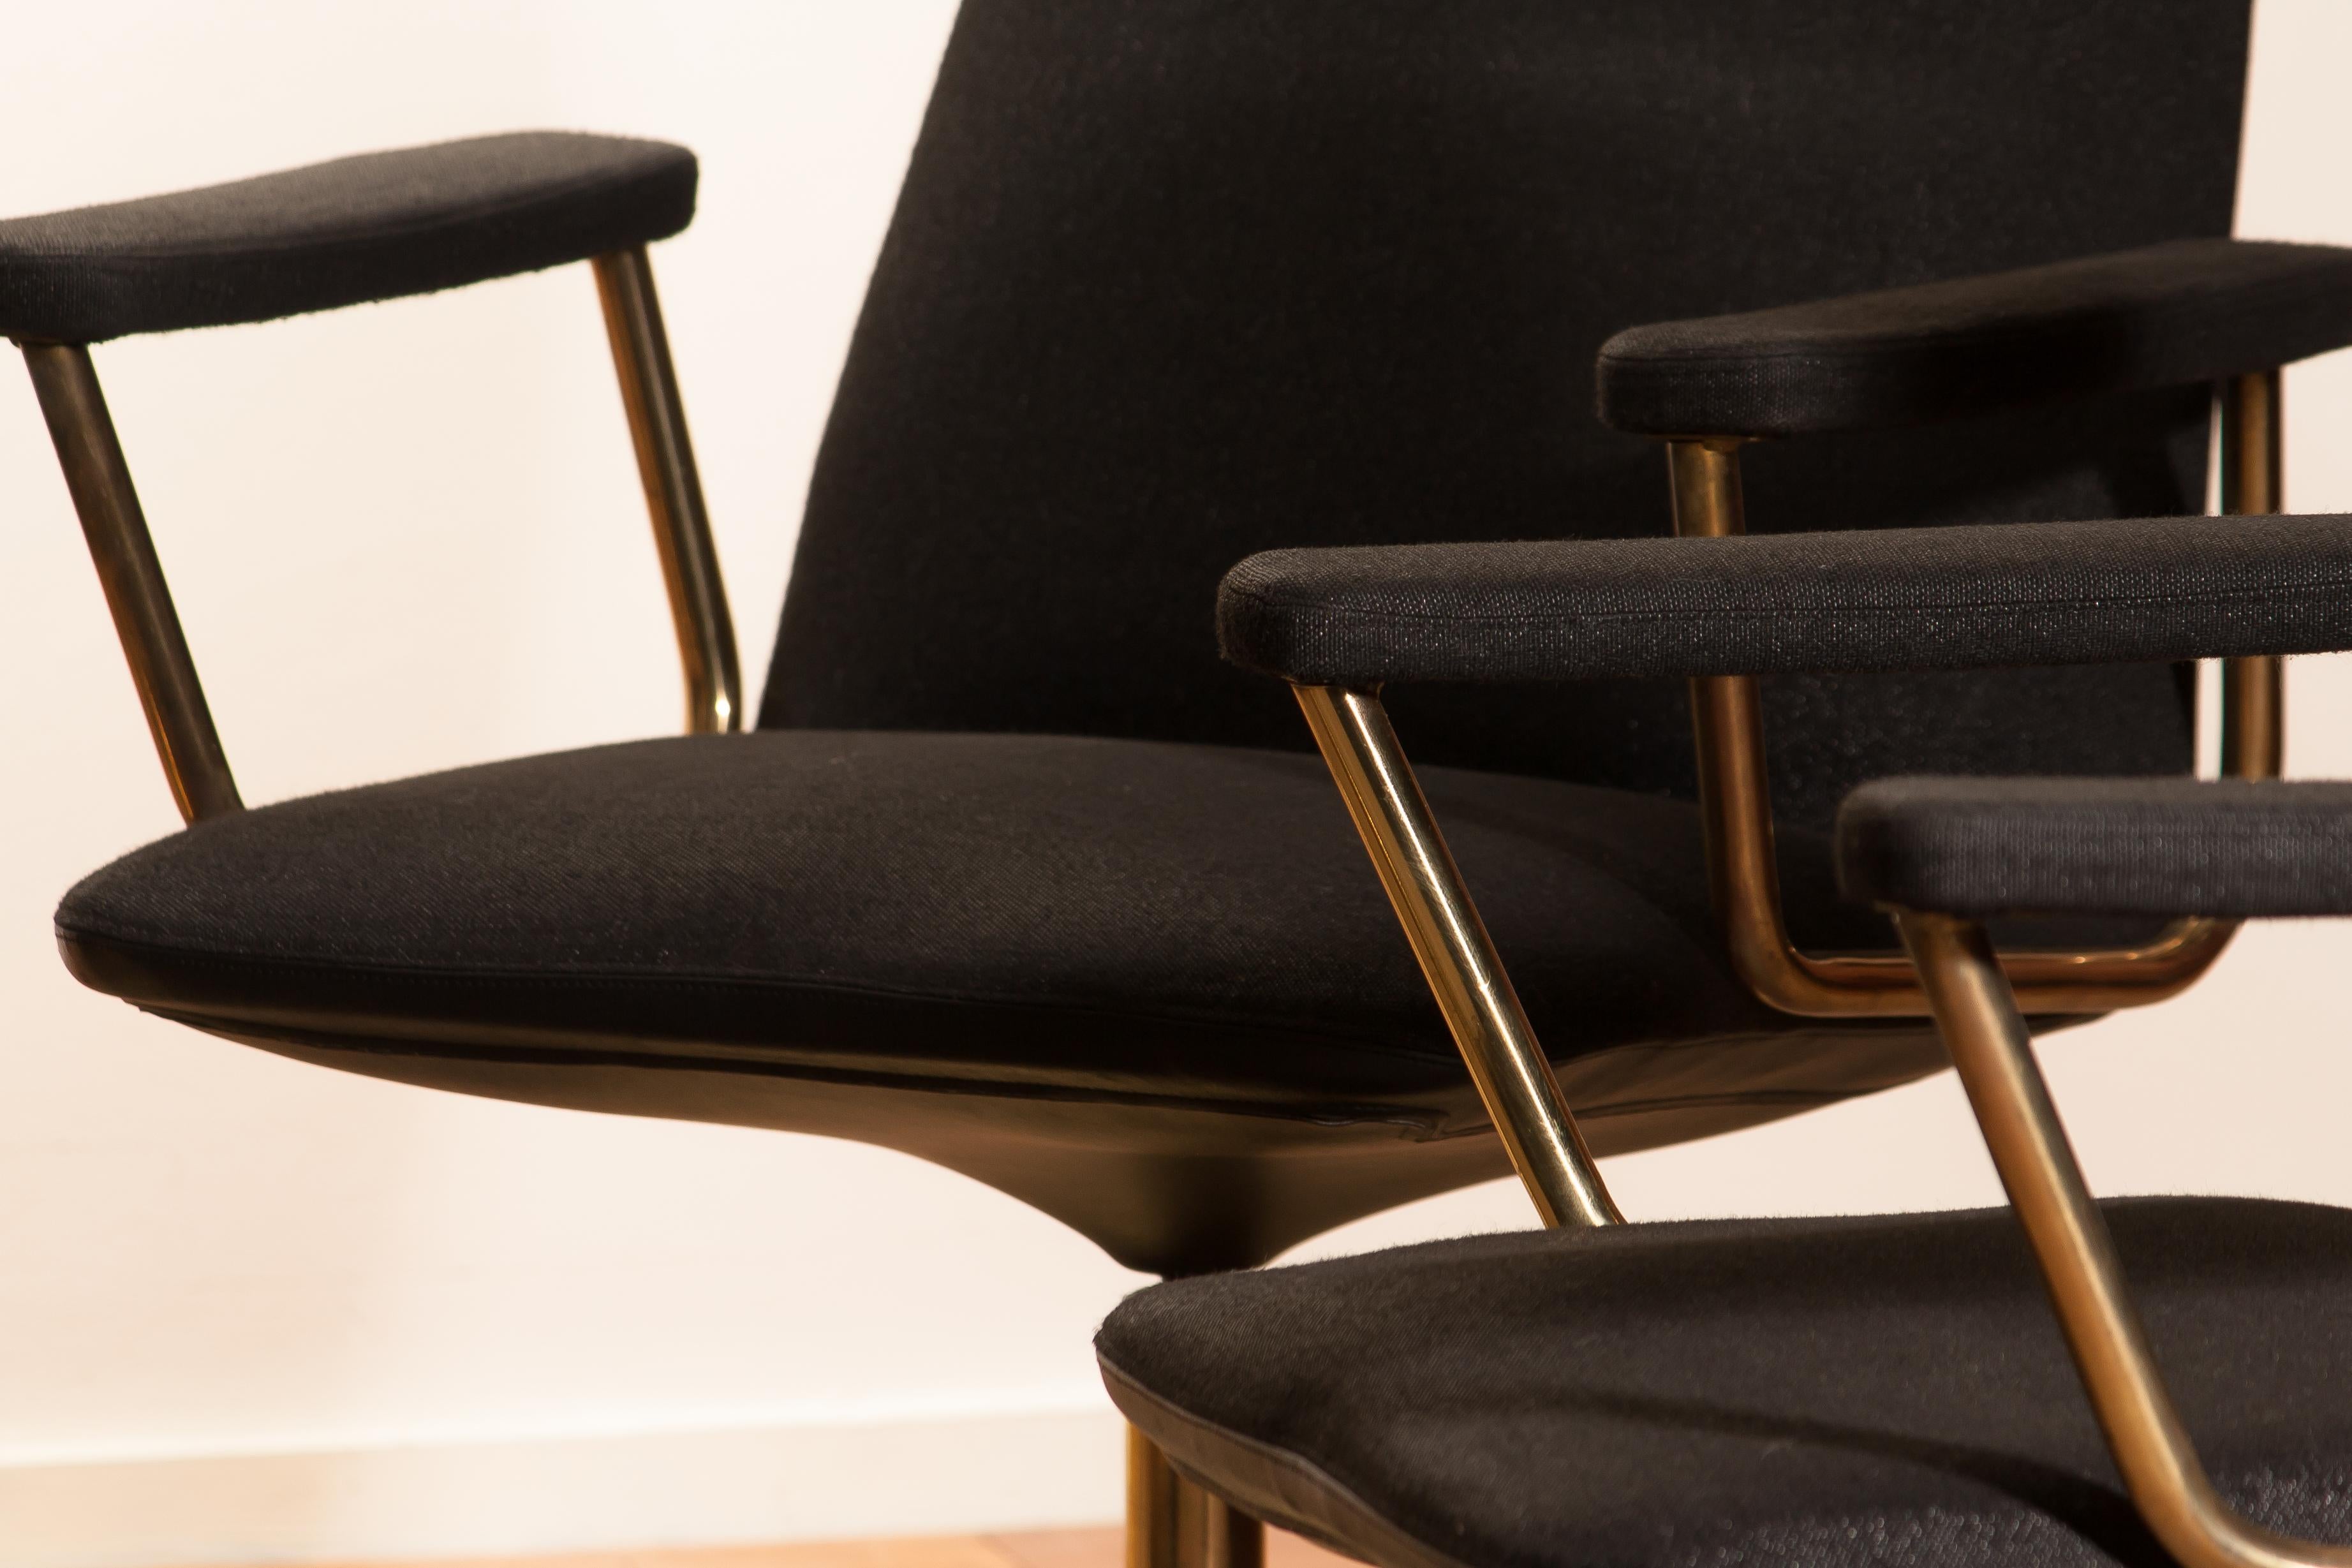 Four Golden, with Black Fabric, Armrest Swivel Chairs by Johanson Design, 1970 10